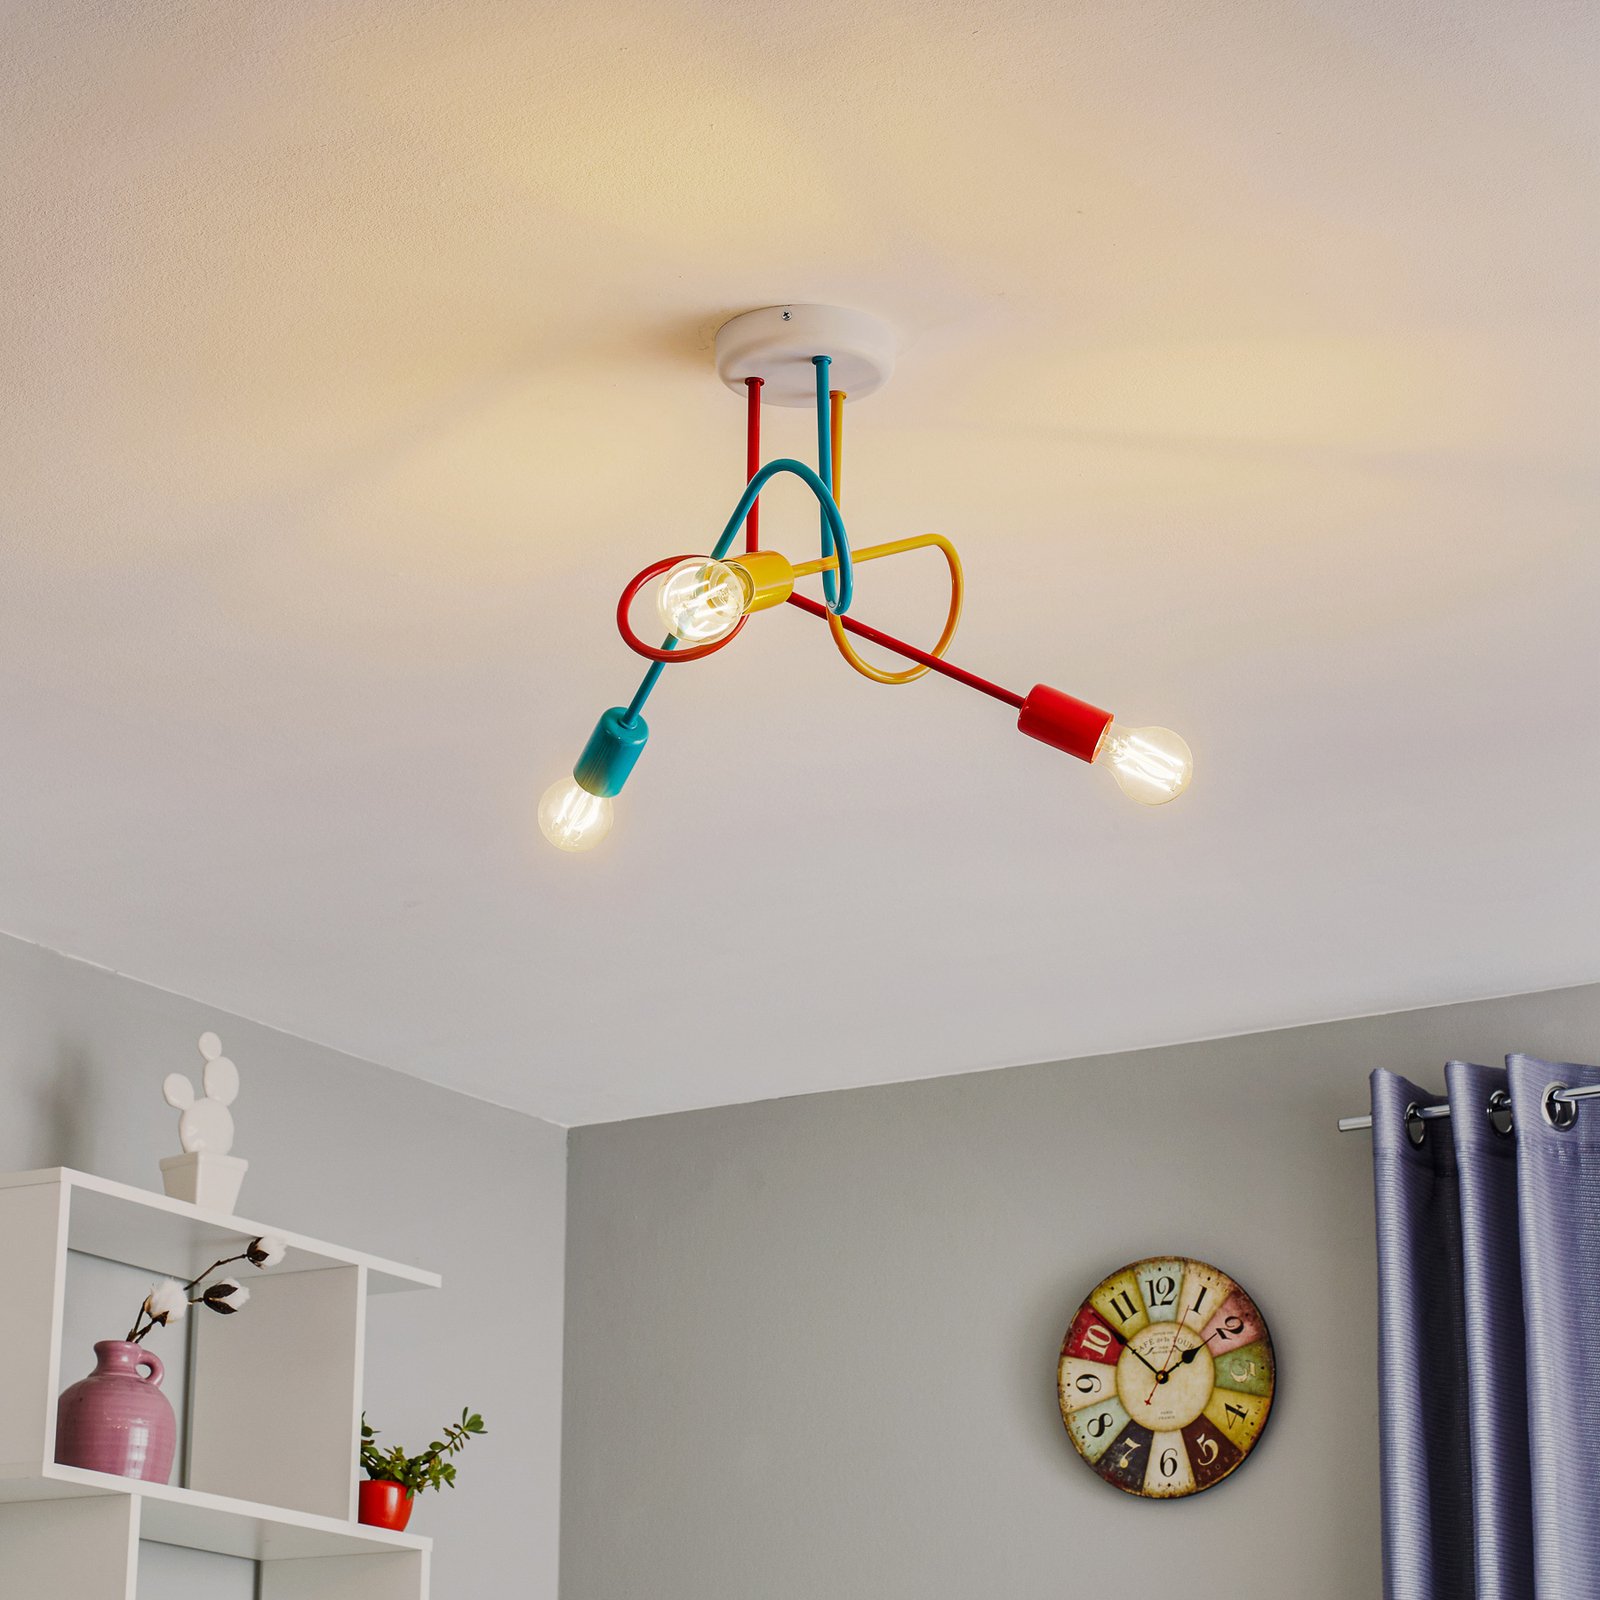 Oxford 3-bulb ceiling lamp orange/red/turquoise